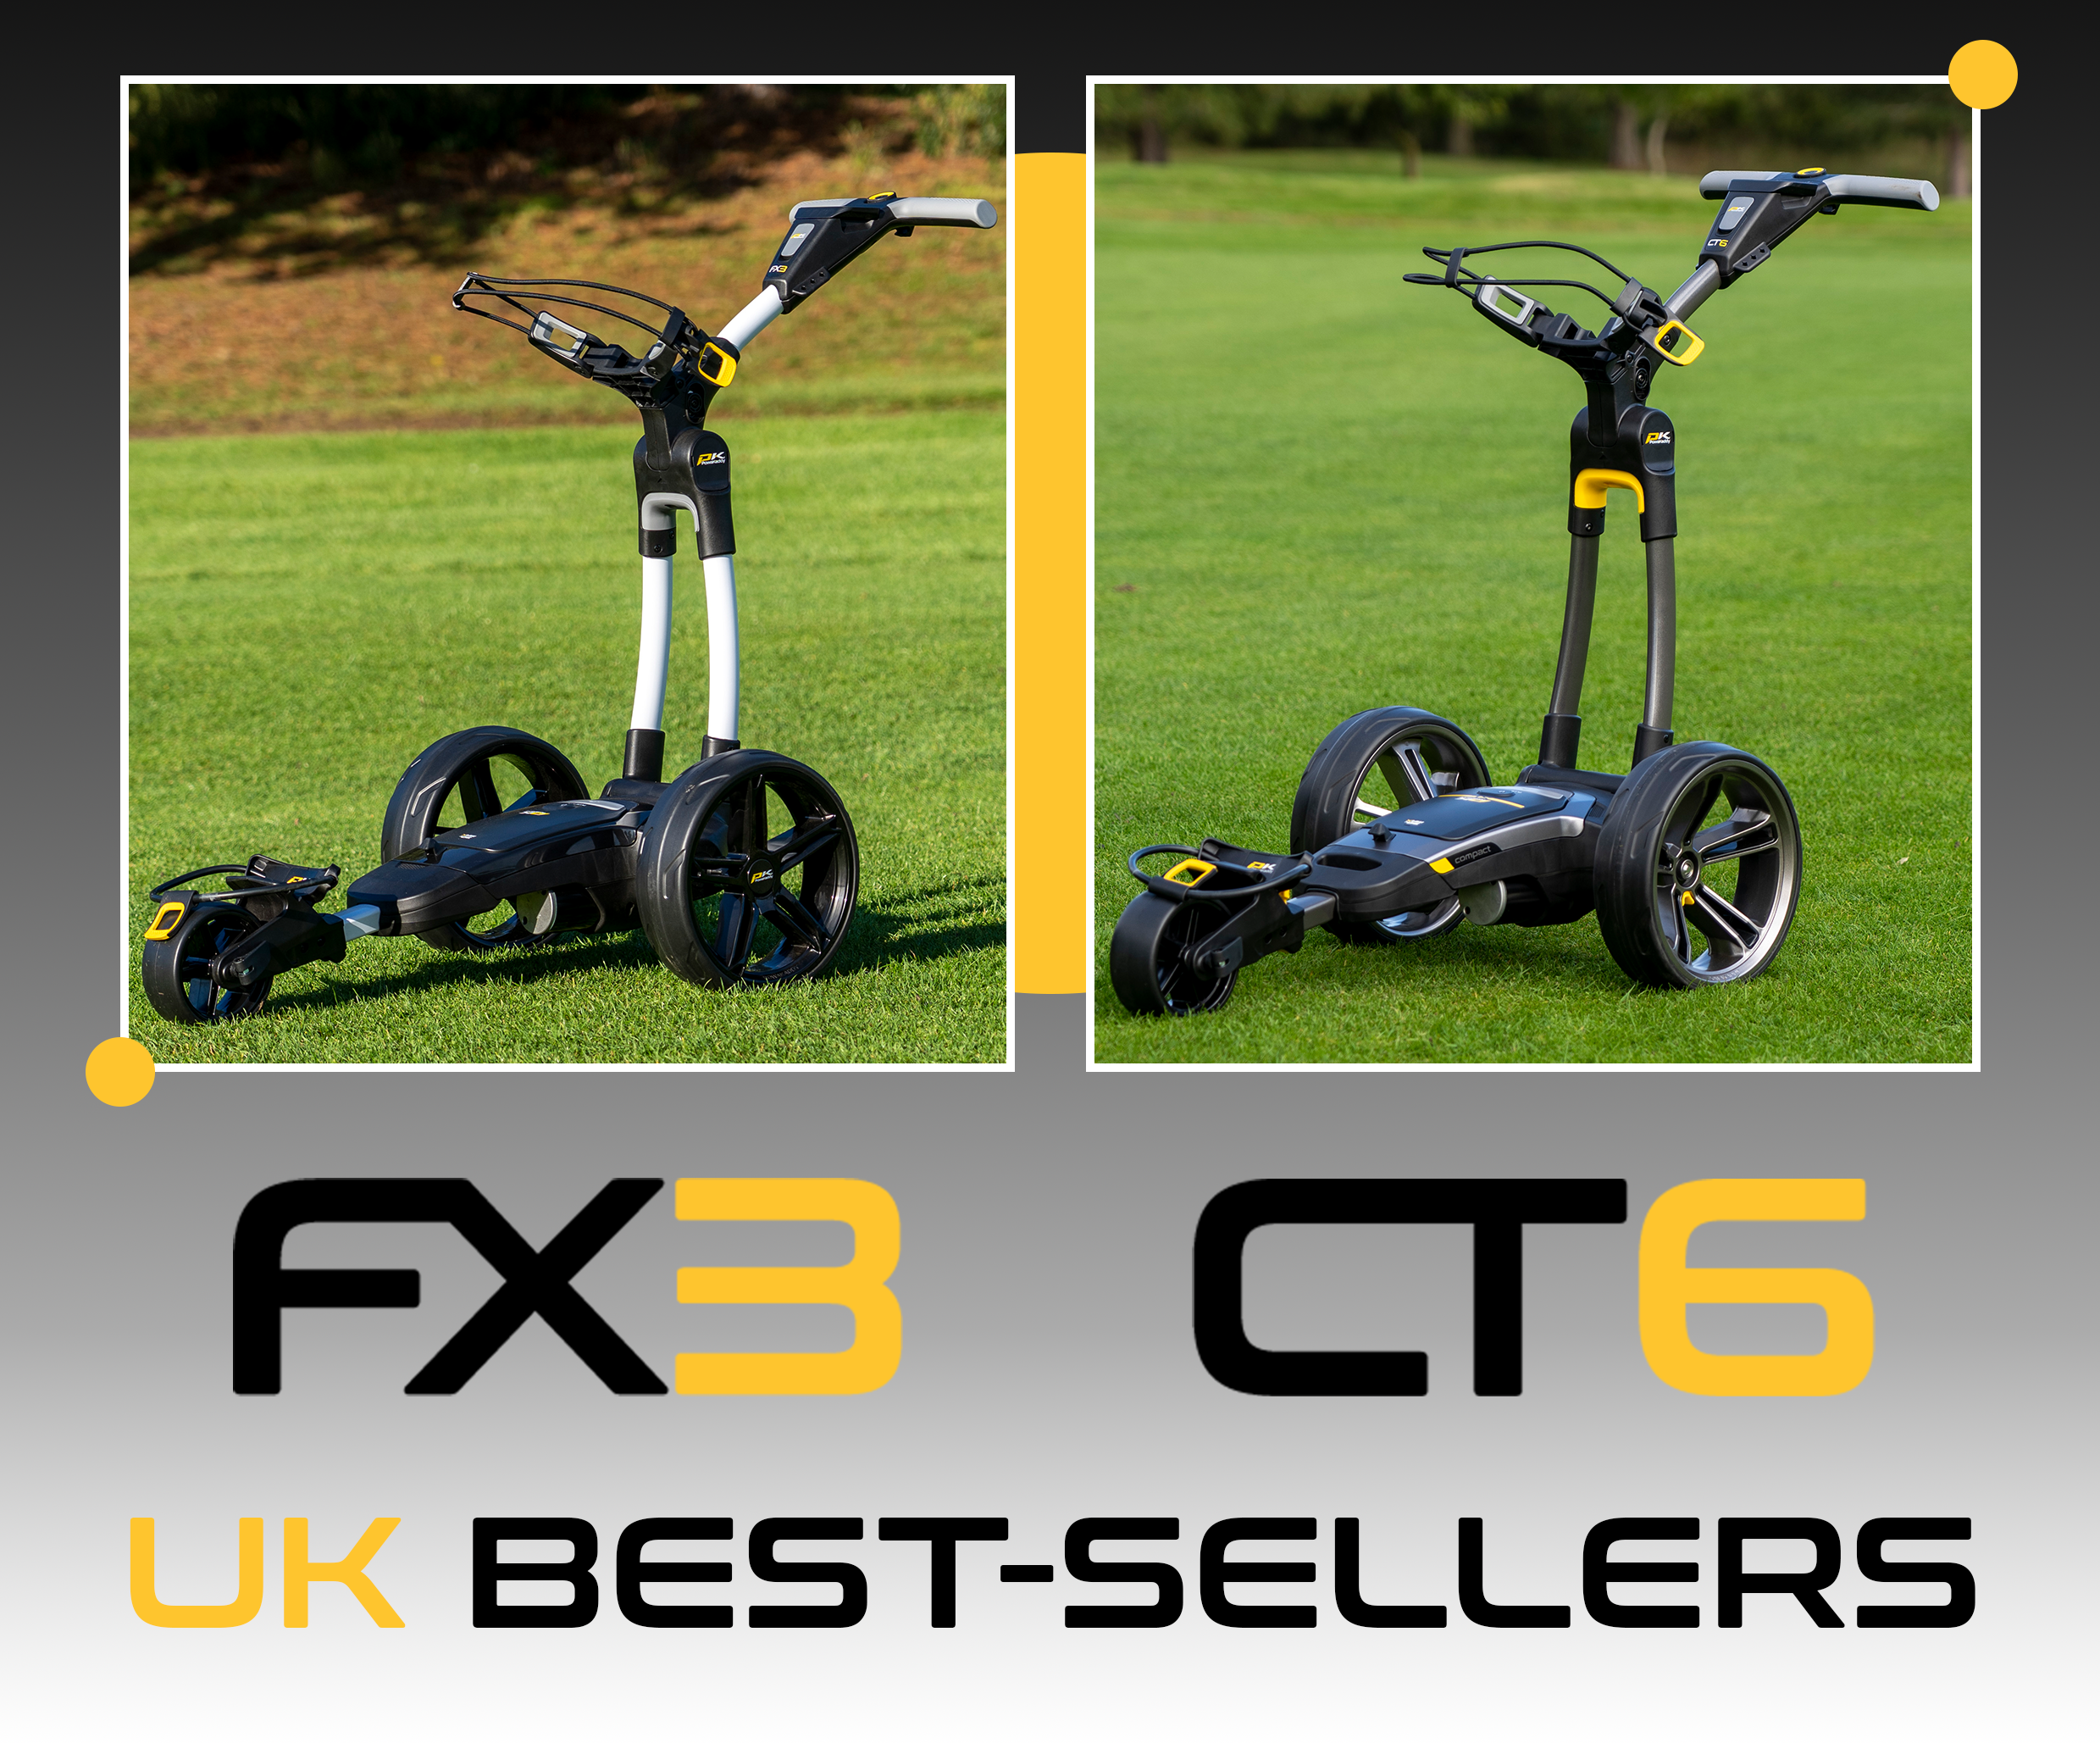 Fx3 and CT6 trolleys shown side by side